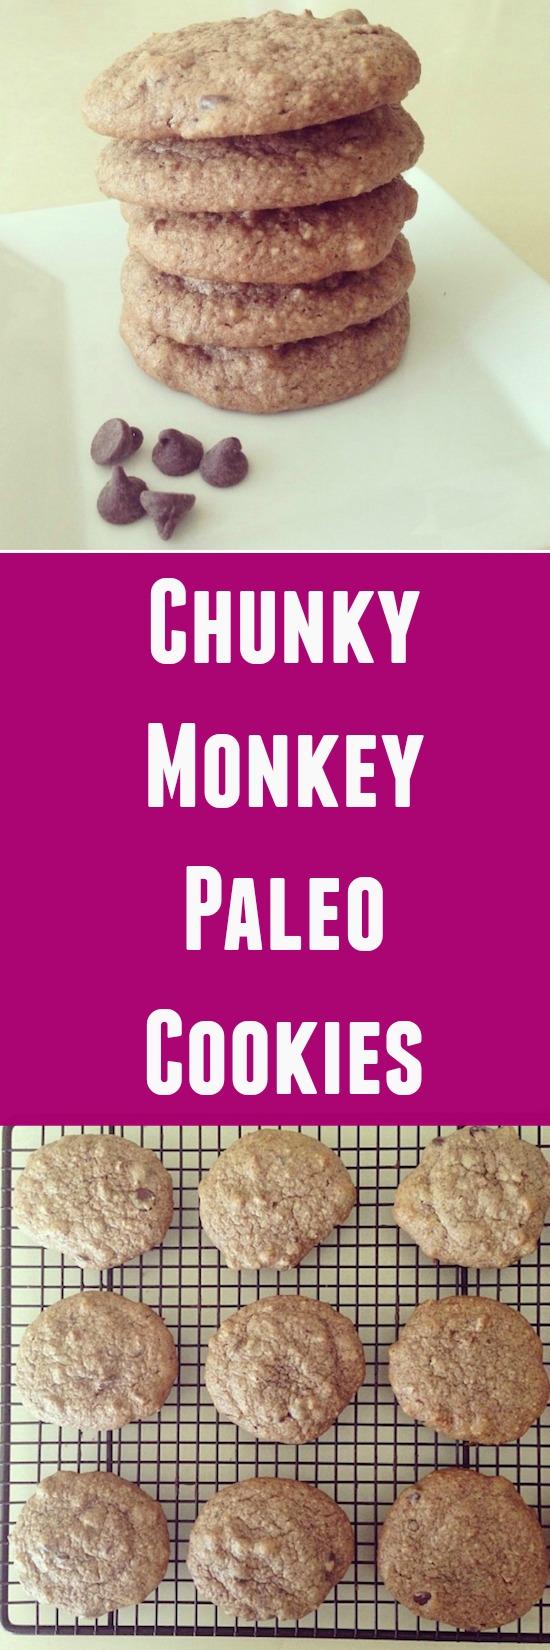 These Chunky Monkey Paleo Cookies are packed with delicious mix-ins and the perfect evening treat!